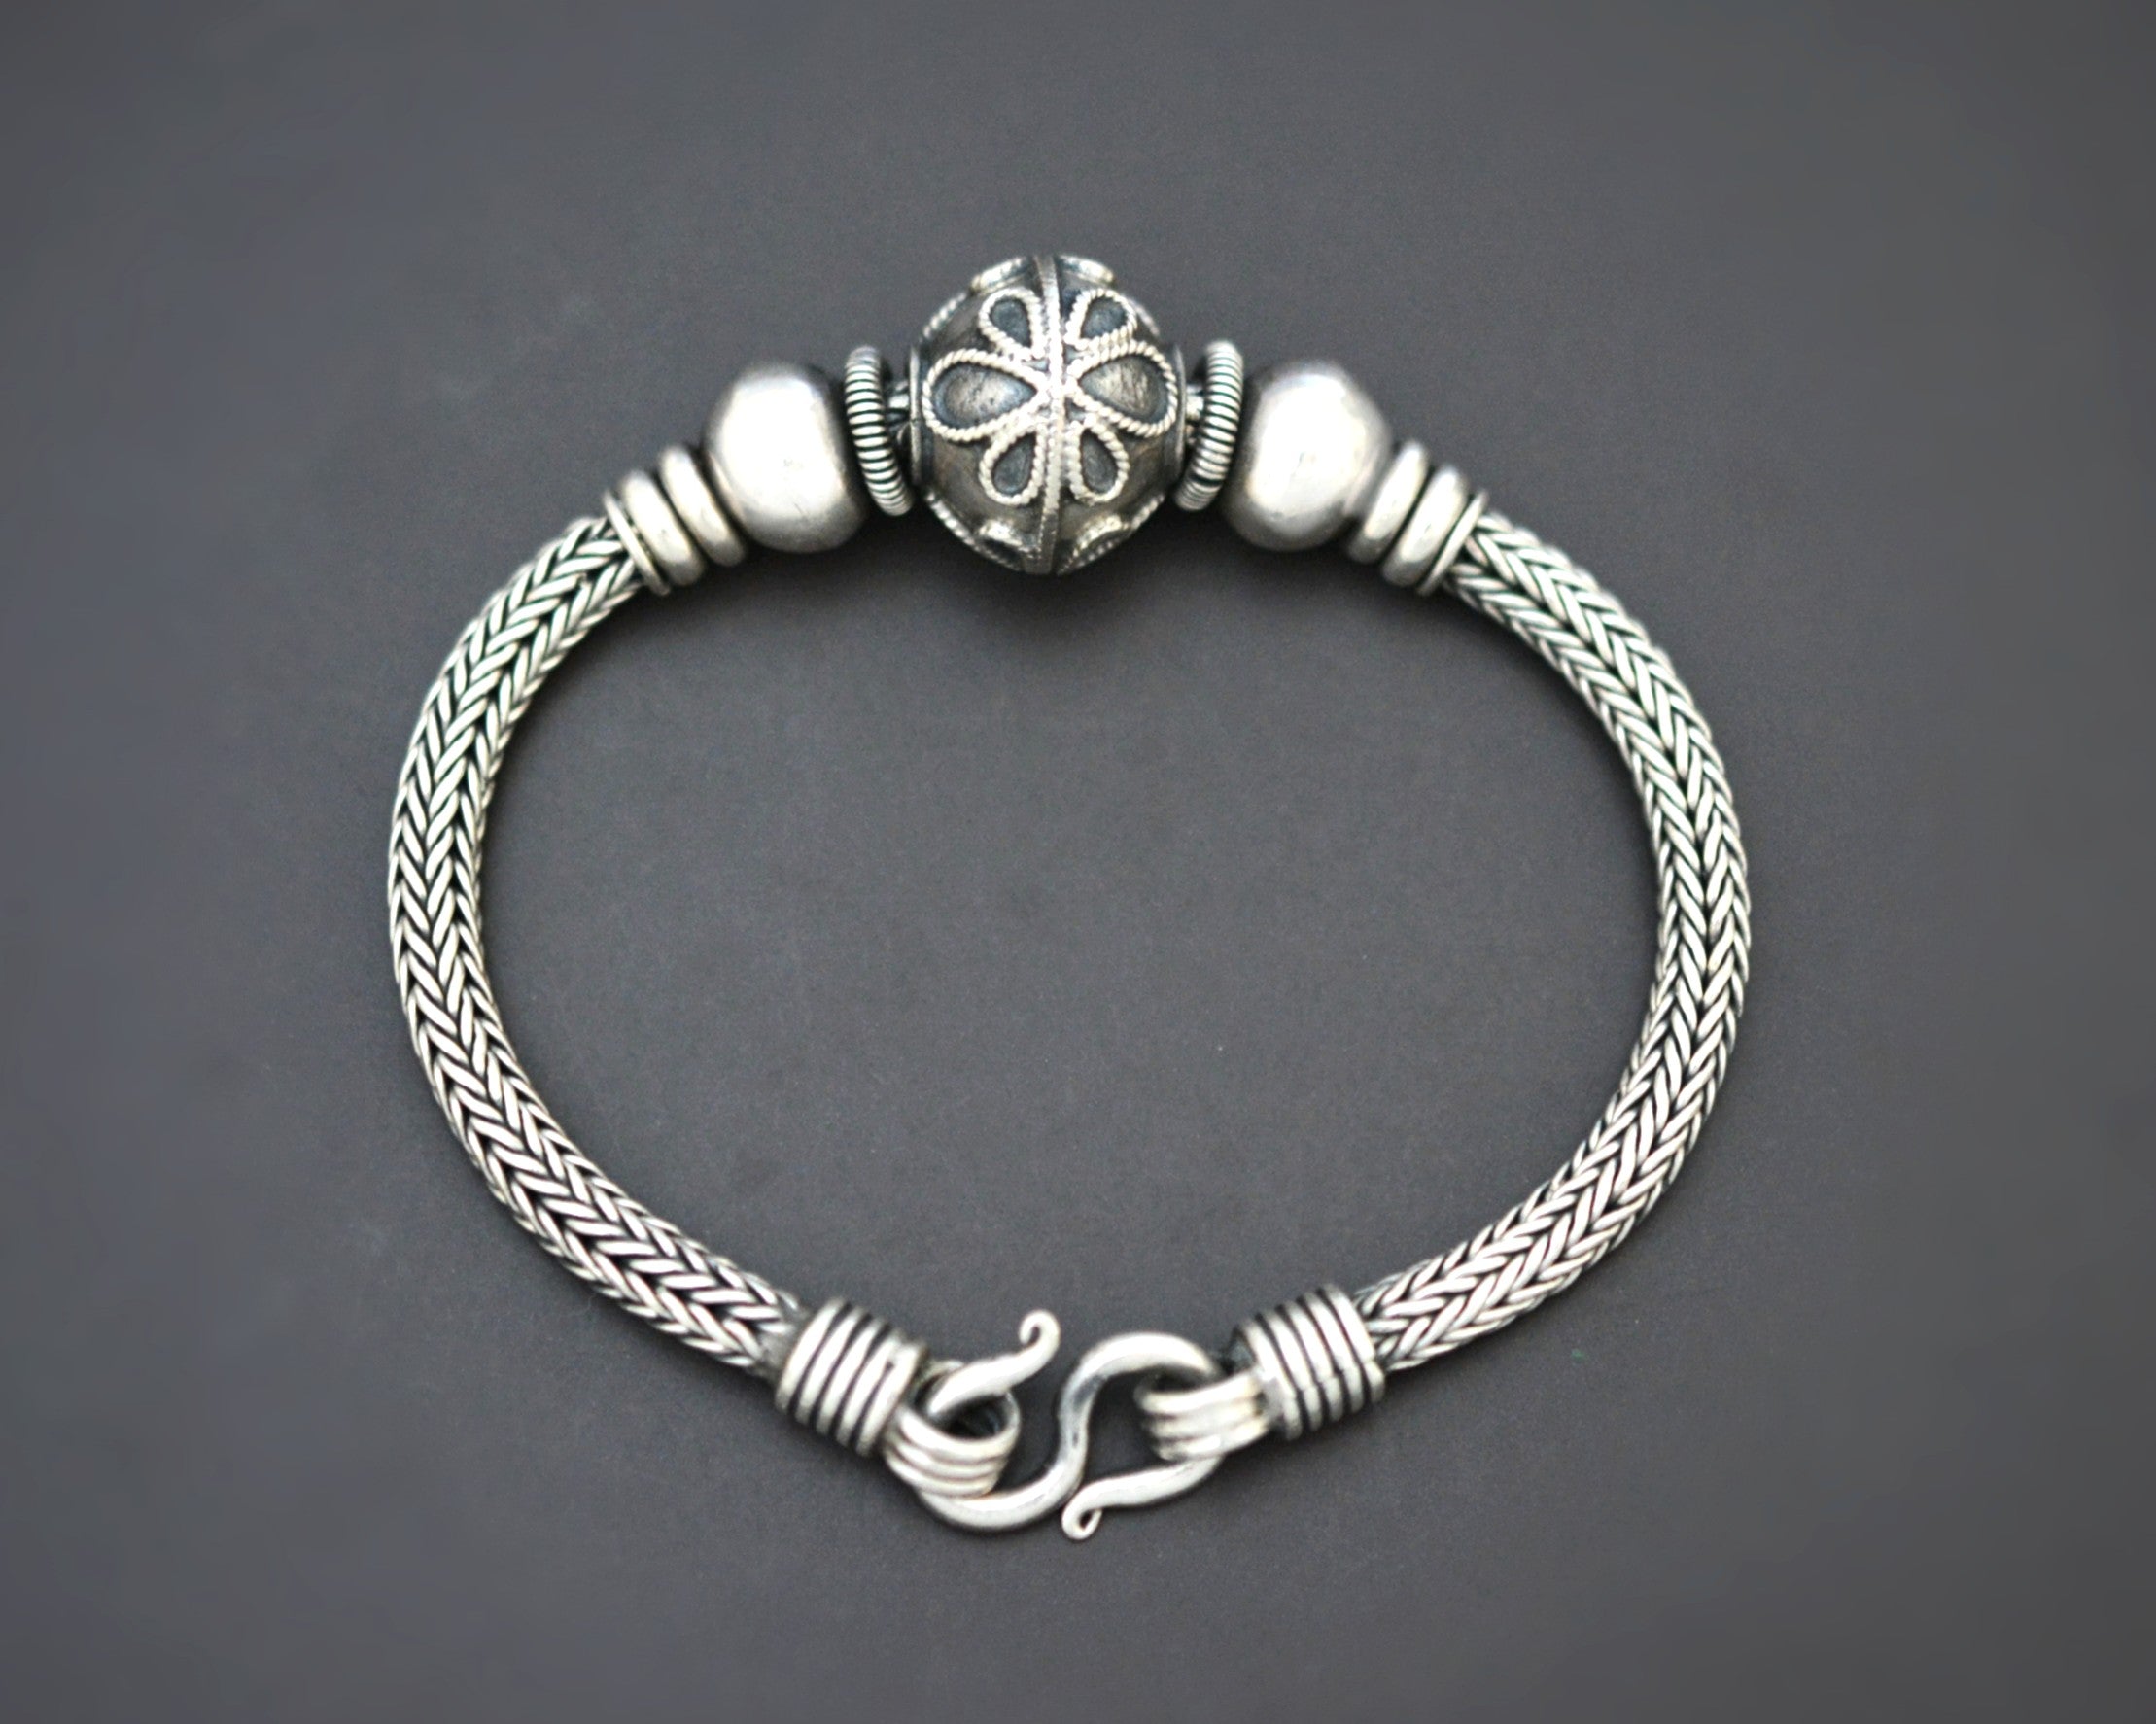 Bali Braided Snake Chain Bracelet with Silver Beads - Small